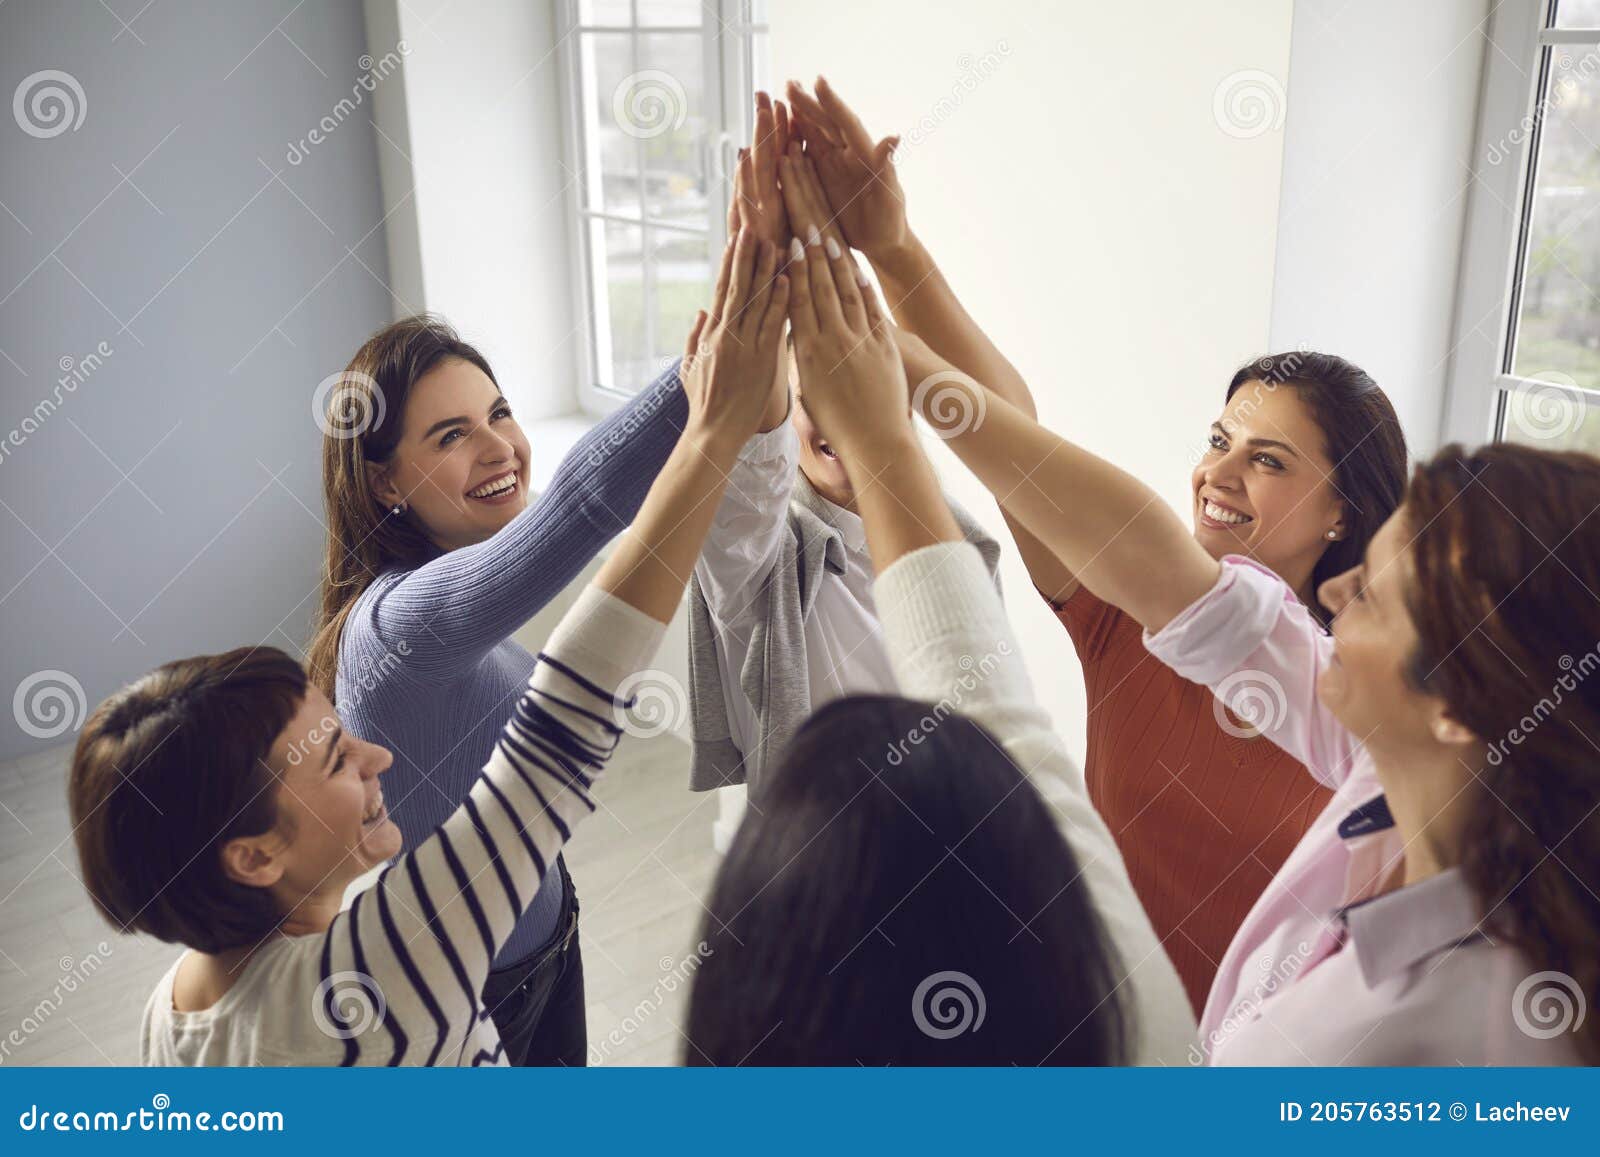 team of happy young women joining hands, feeling united, confident and empowered